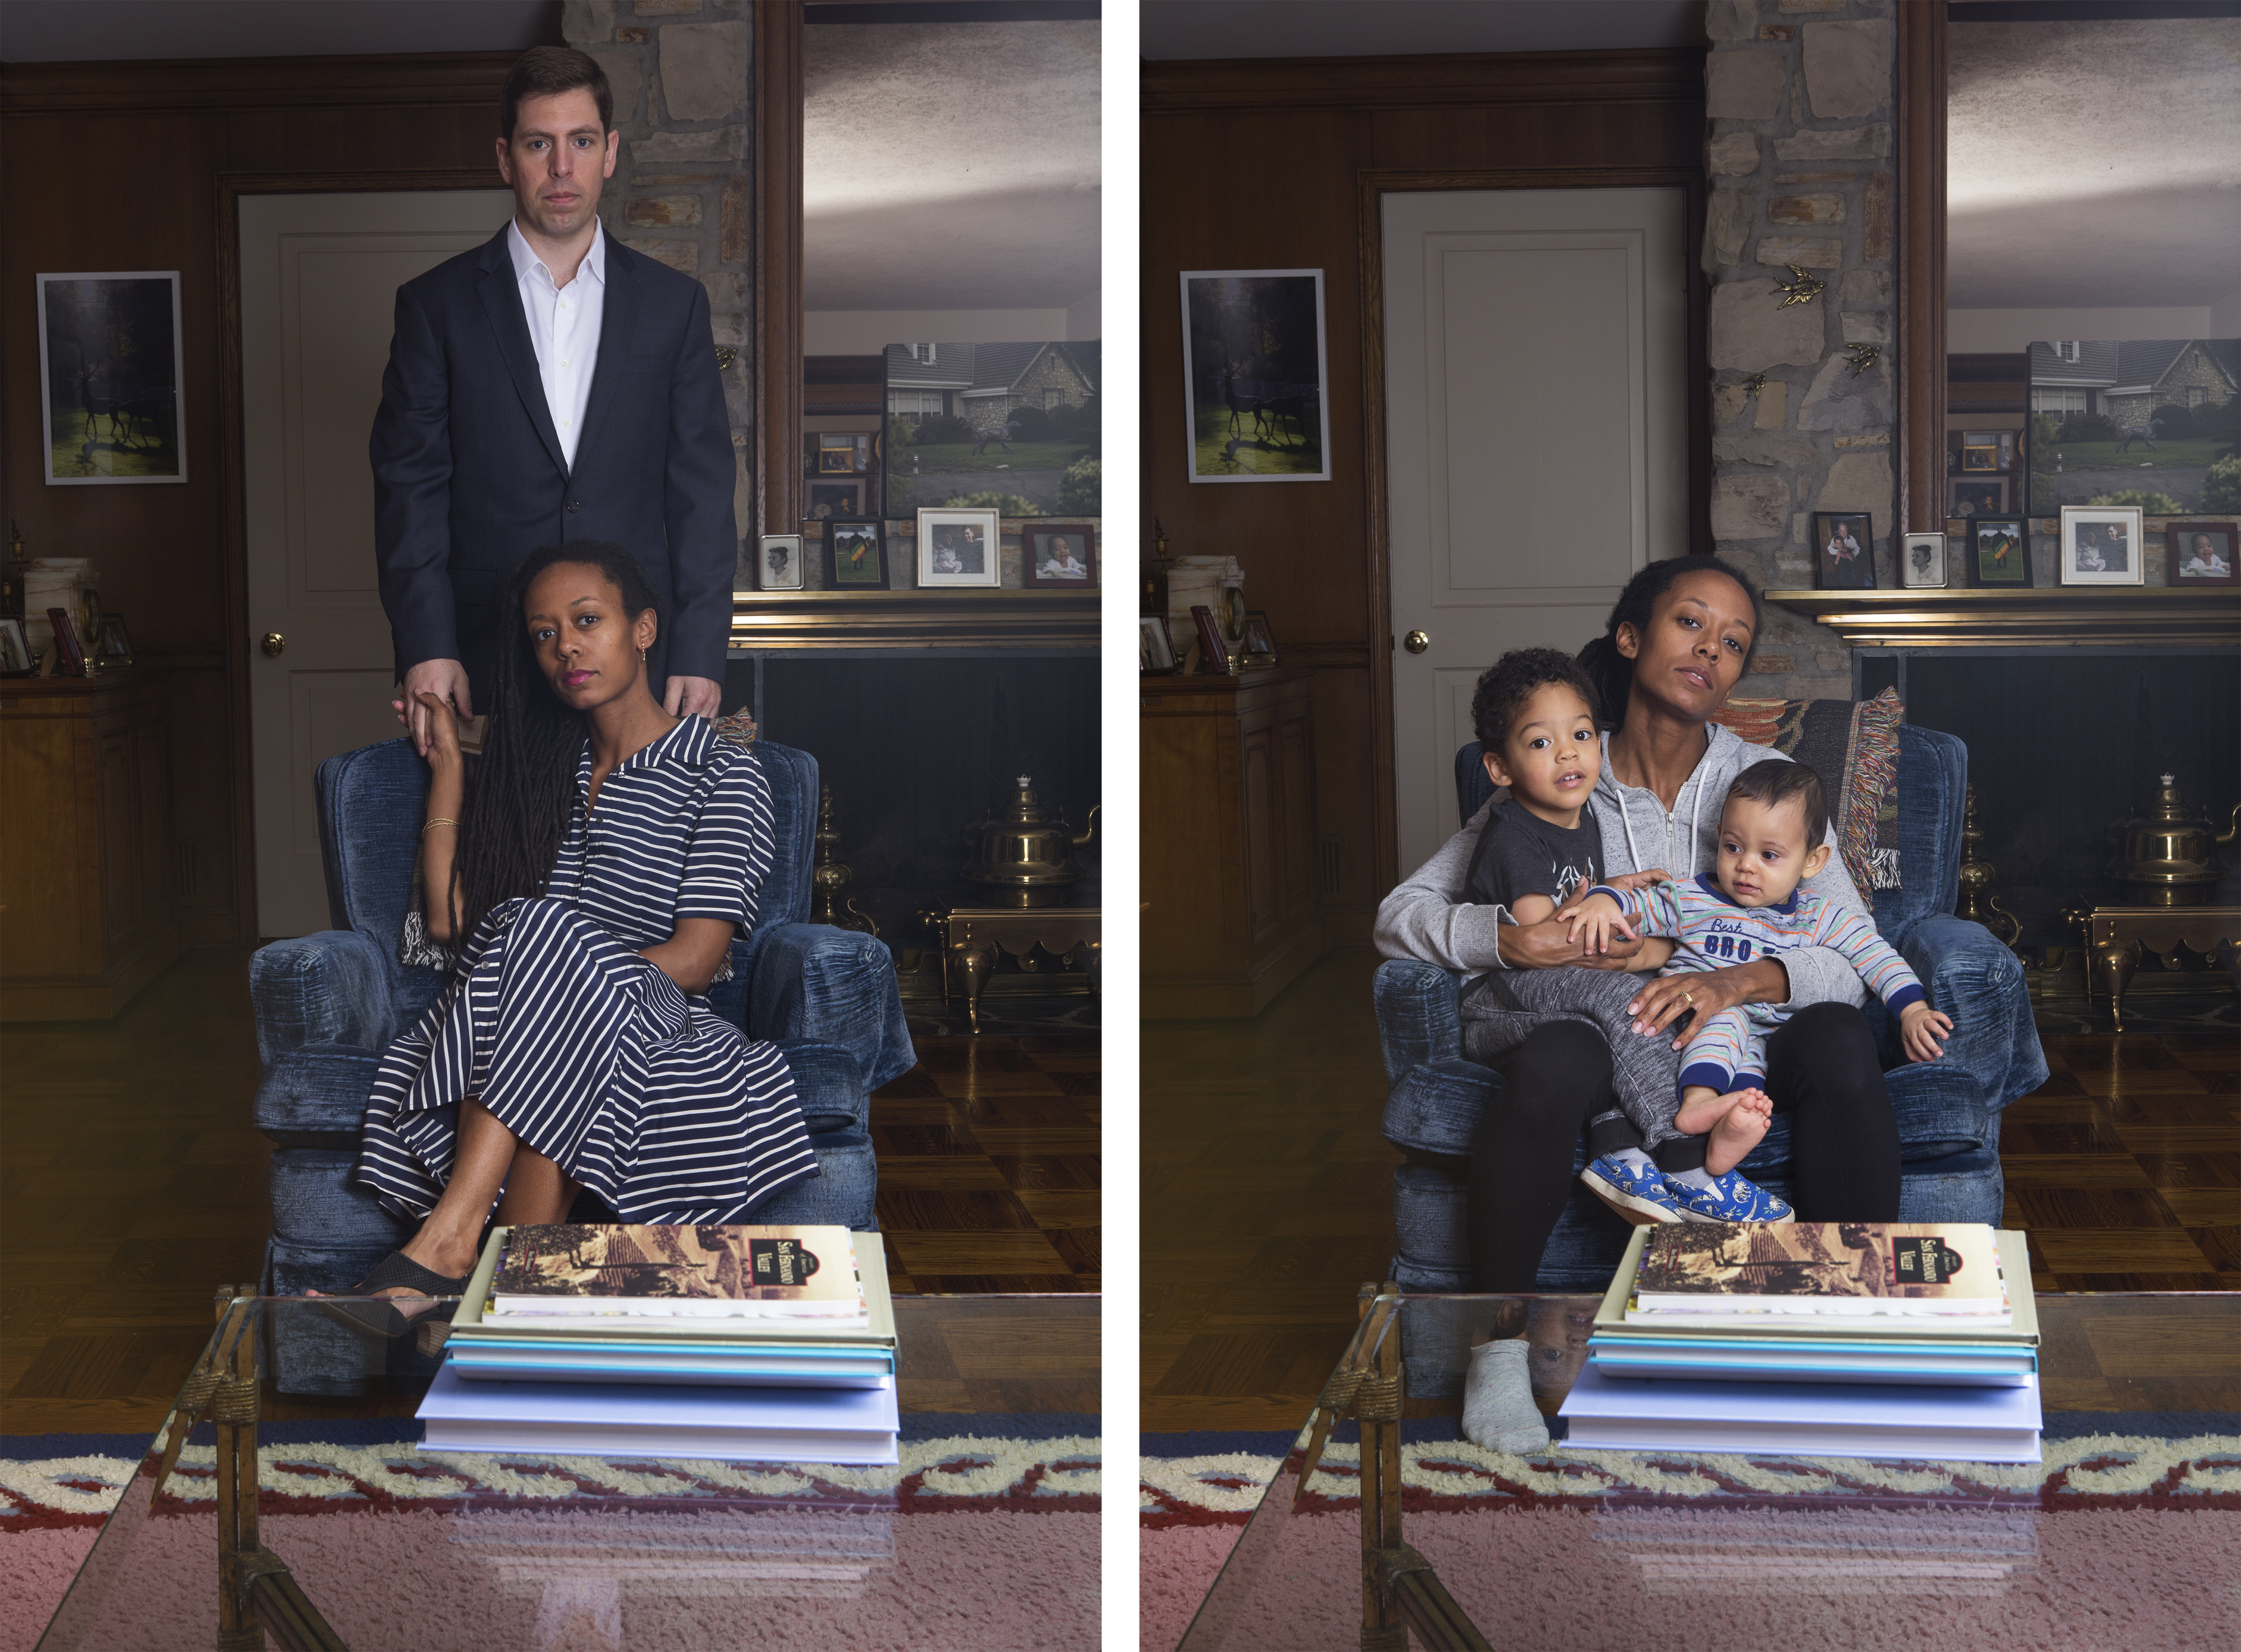 Janna Ireland, Wife and Mother, 2018, Los Angeles County Museum of Art, purchased with funds provided by the Ralph M. Parsons Fund, © Janna Ireland, image courtesy of the artist